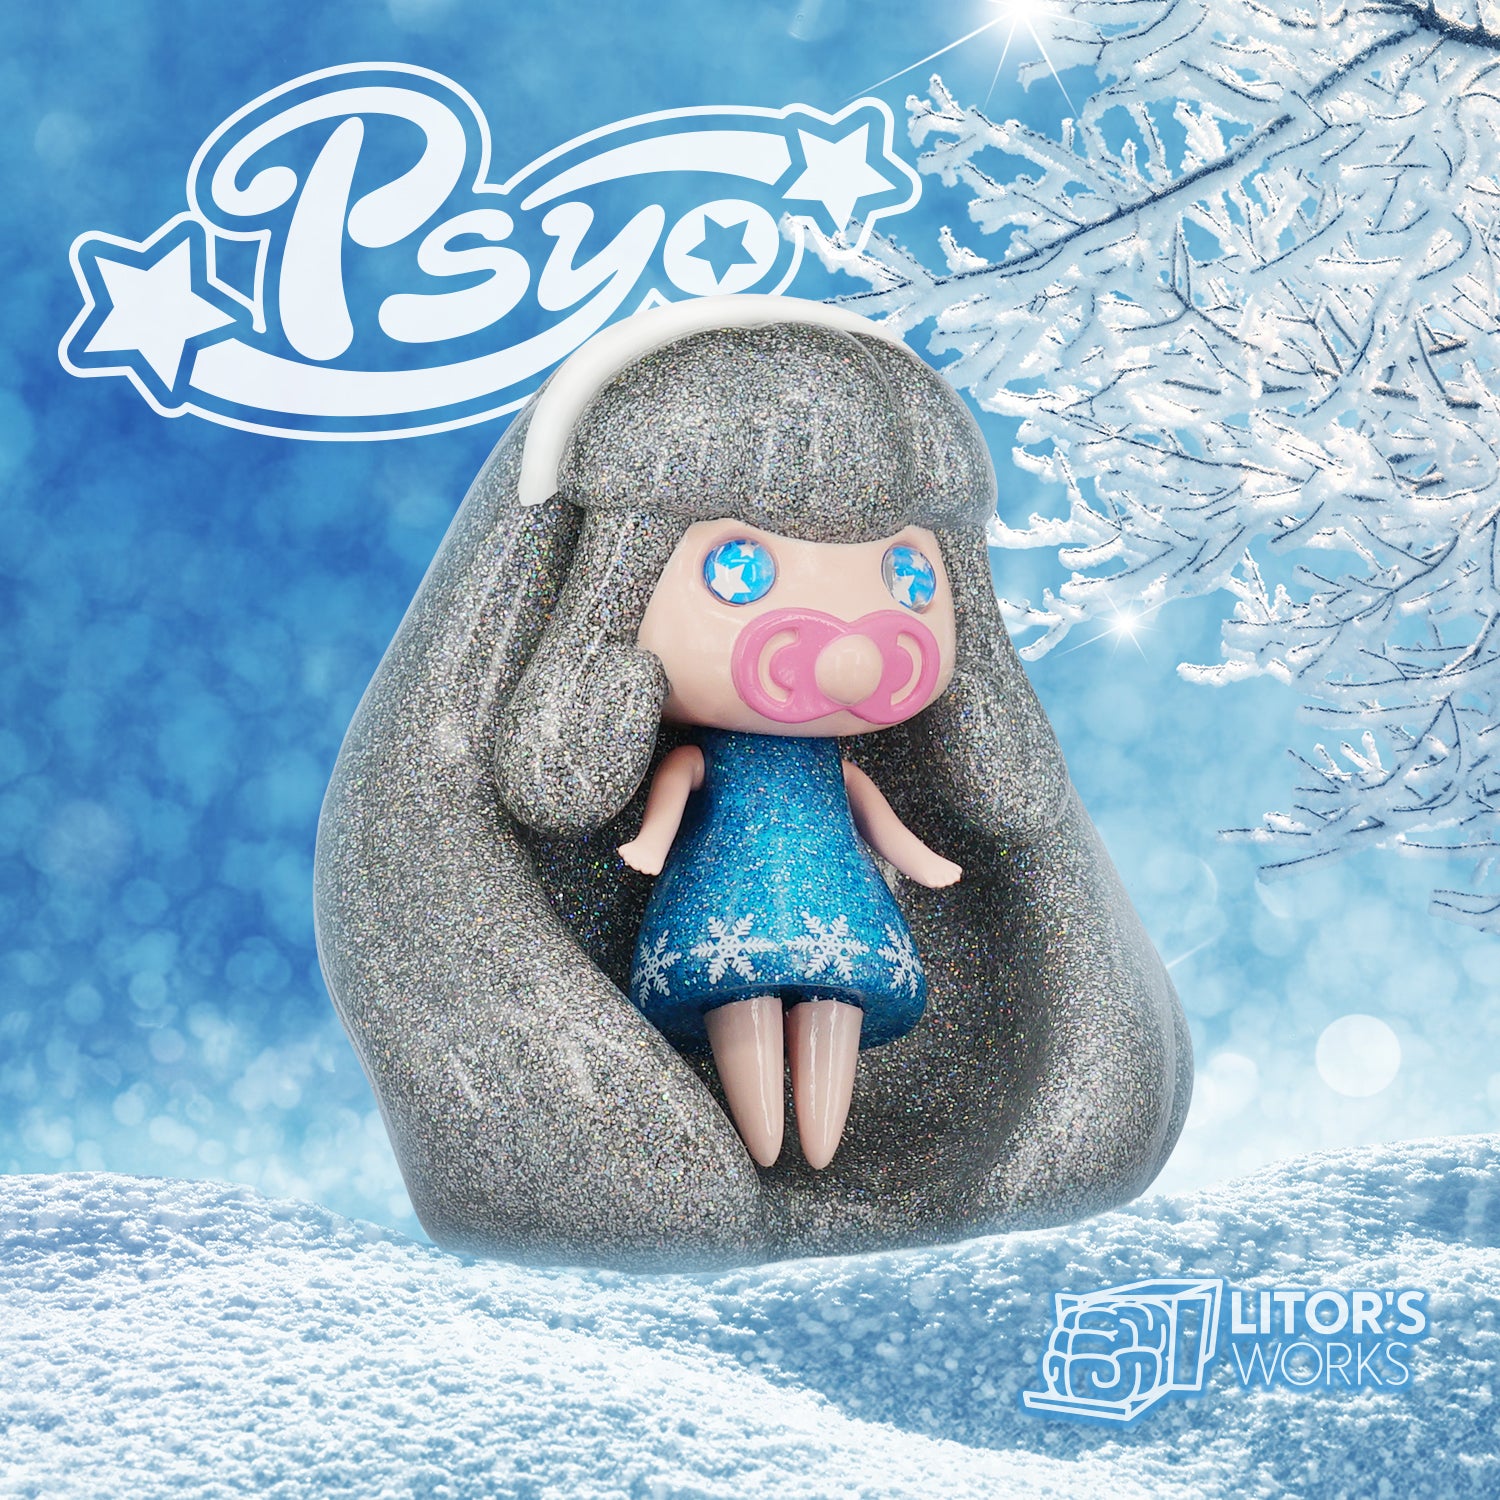 Psyo - Elsa by Litor's Works toy doll with pacifier in snowy landscape.